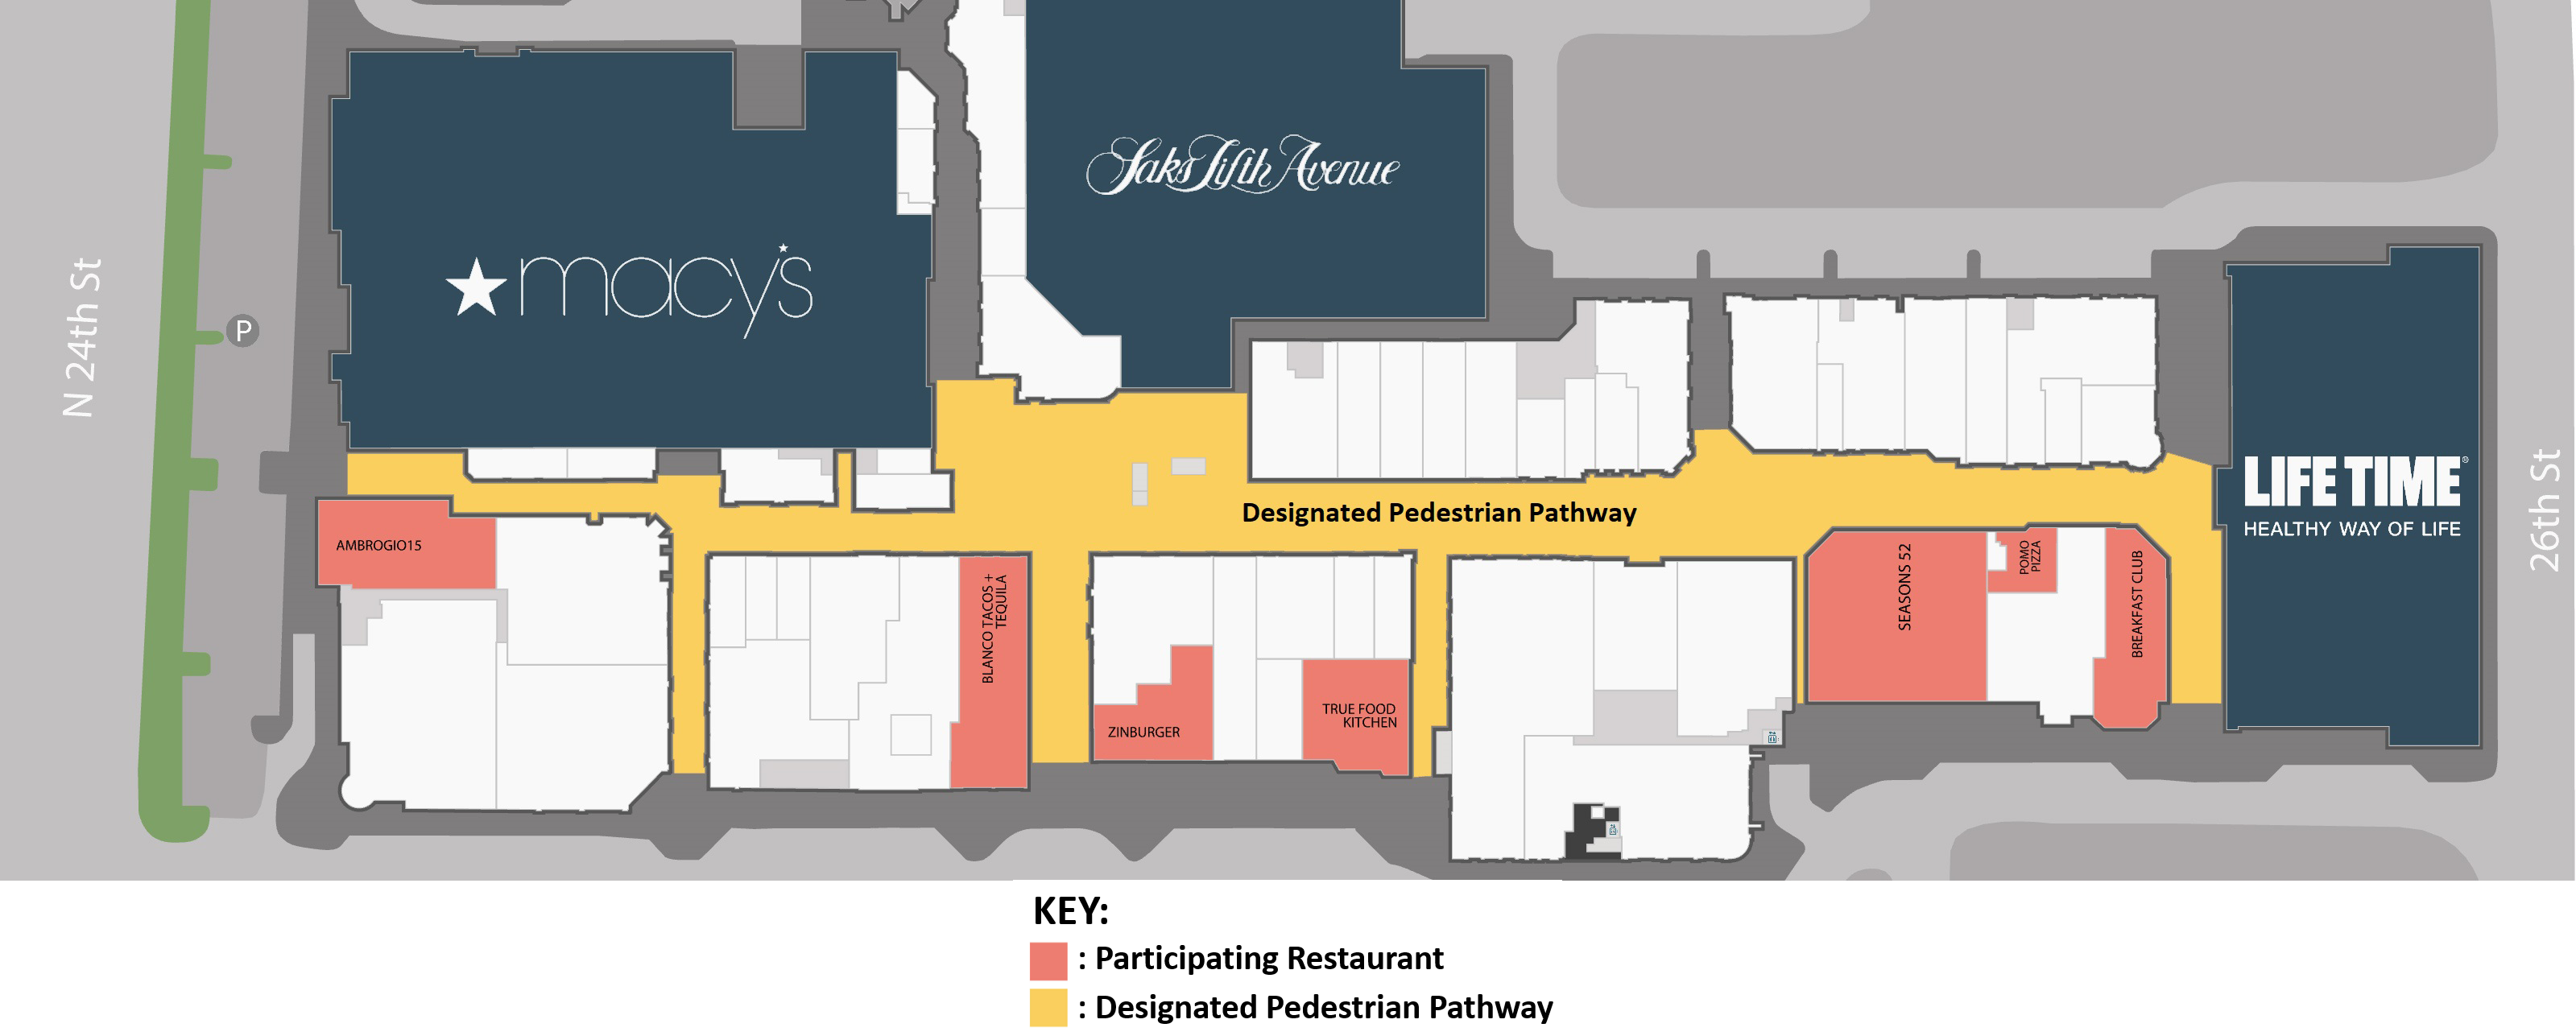 A map of Biltmore Fashion Park showing participating restaurants and the designated pedestrian pathway